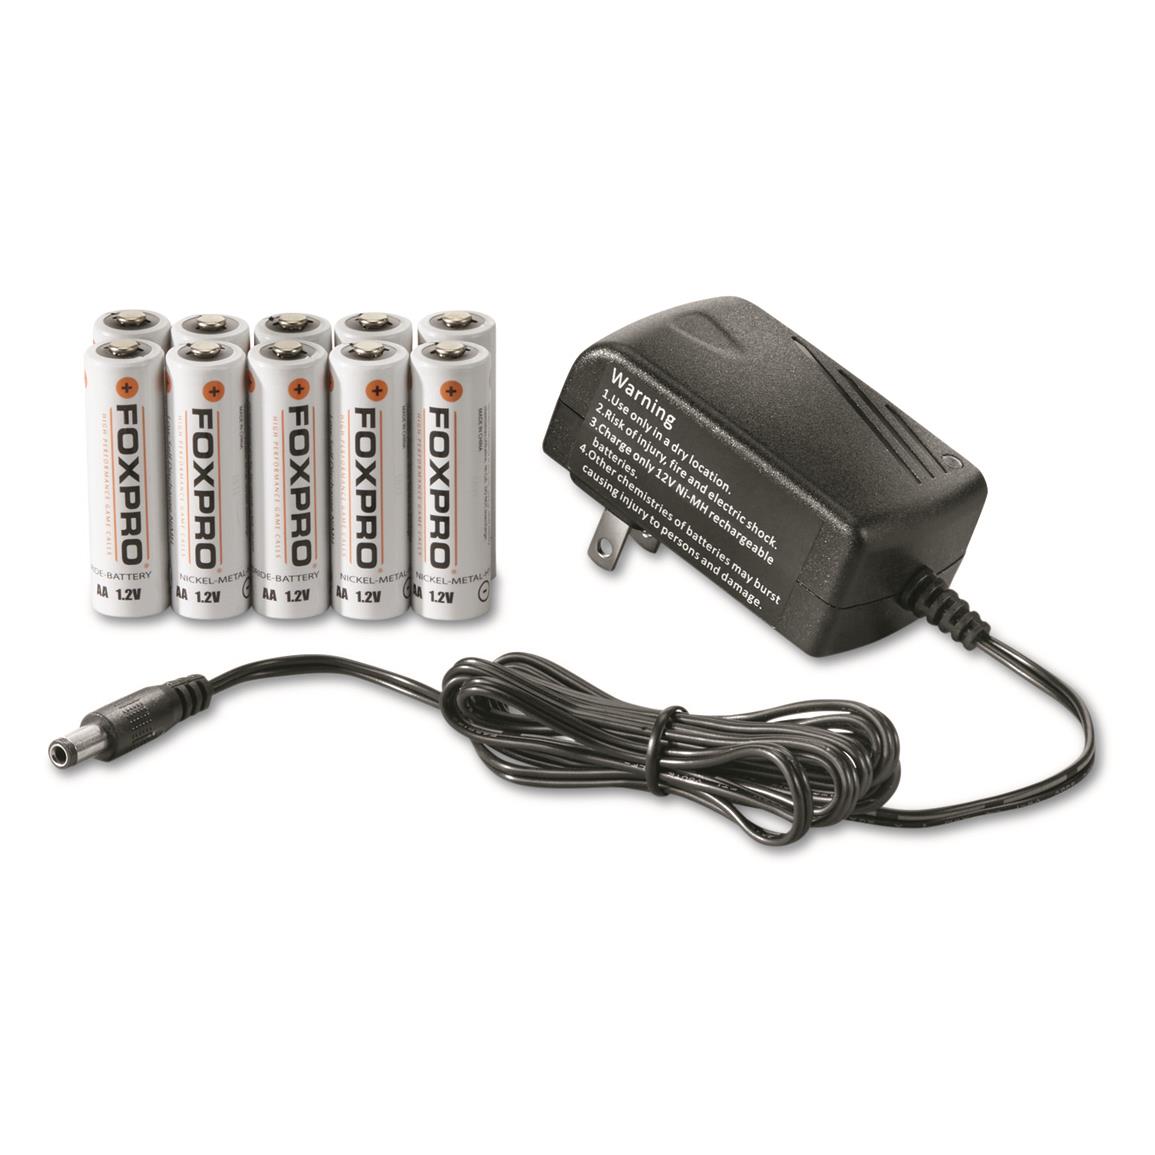 FOXPRO® AA Rechargeable NiMH Battery Kit with Charger